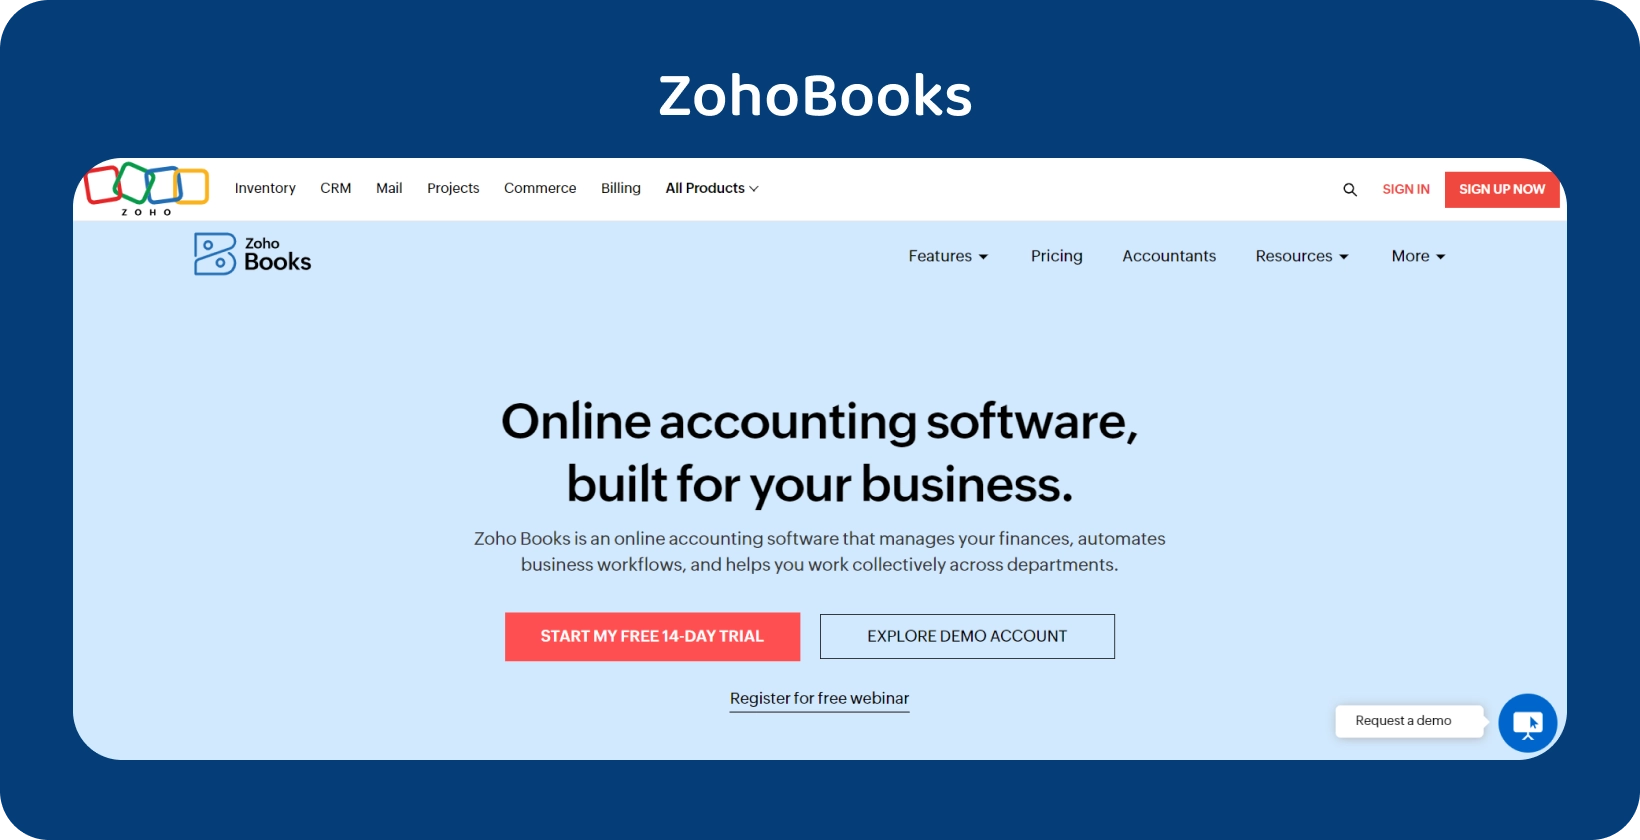 Zoho Books homepage banner highlights its business-tailored online accounting software for streamlined operations